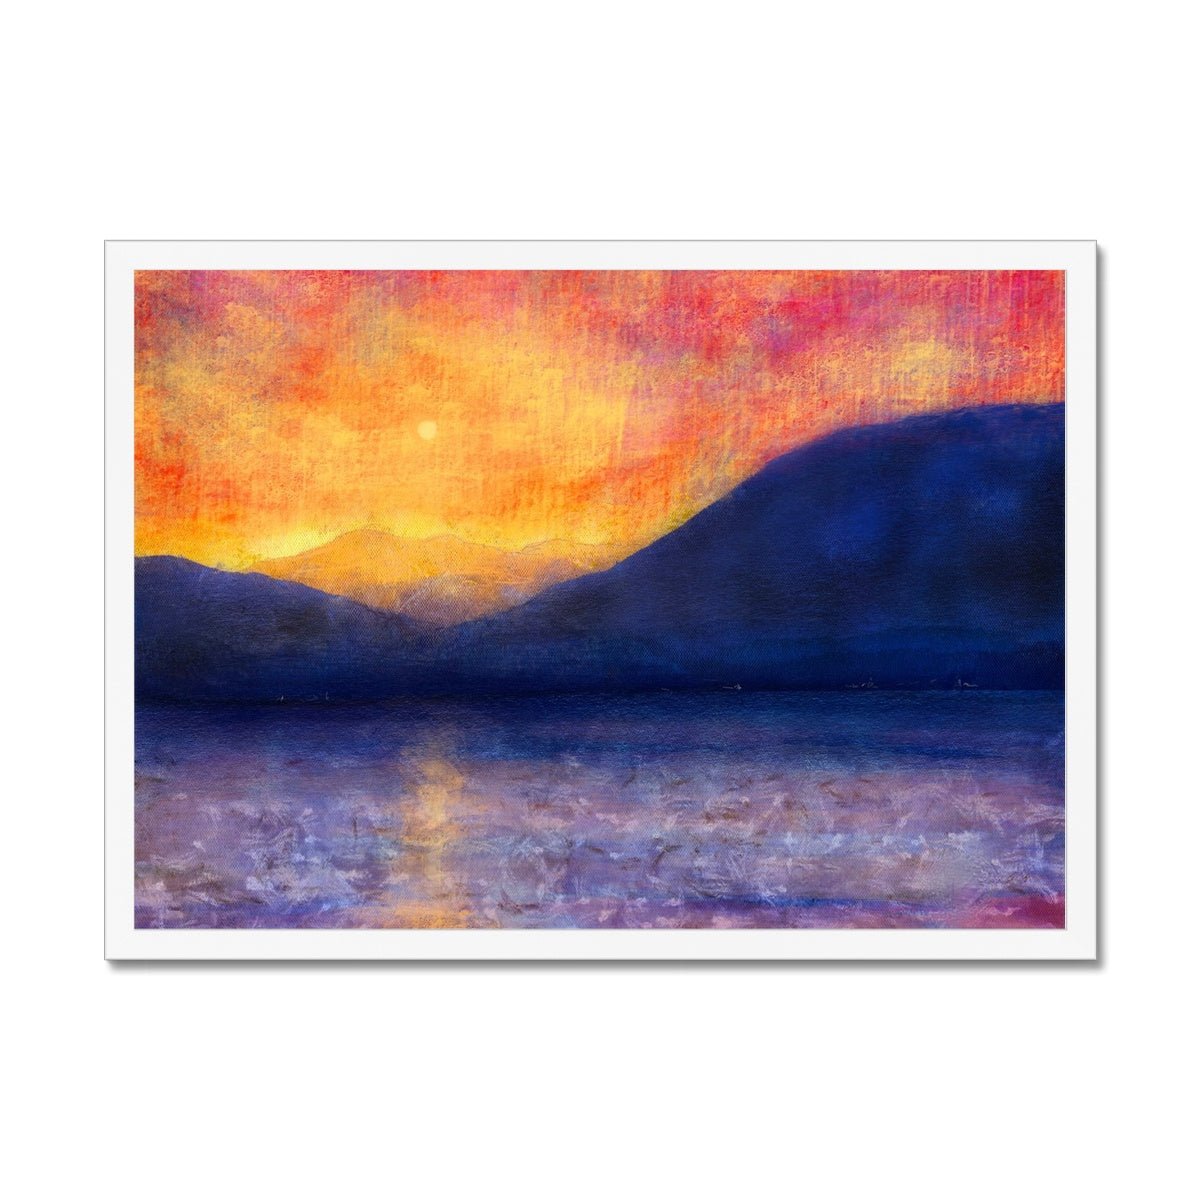 Sunset Approaching Mull Painting | Framed Prints From Scotland-Framed Prints-Hebridean Islands Art Gallery-A2 Landscape-White Frame-Paintings, Prints, Homeware, Art Gifts From Scotland By Scottish Artist Kevin Hunter